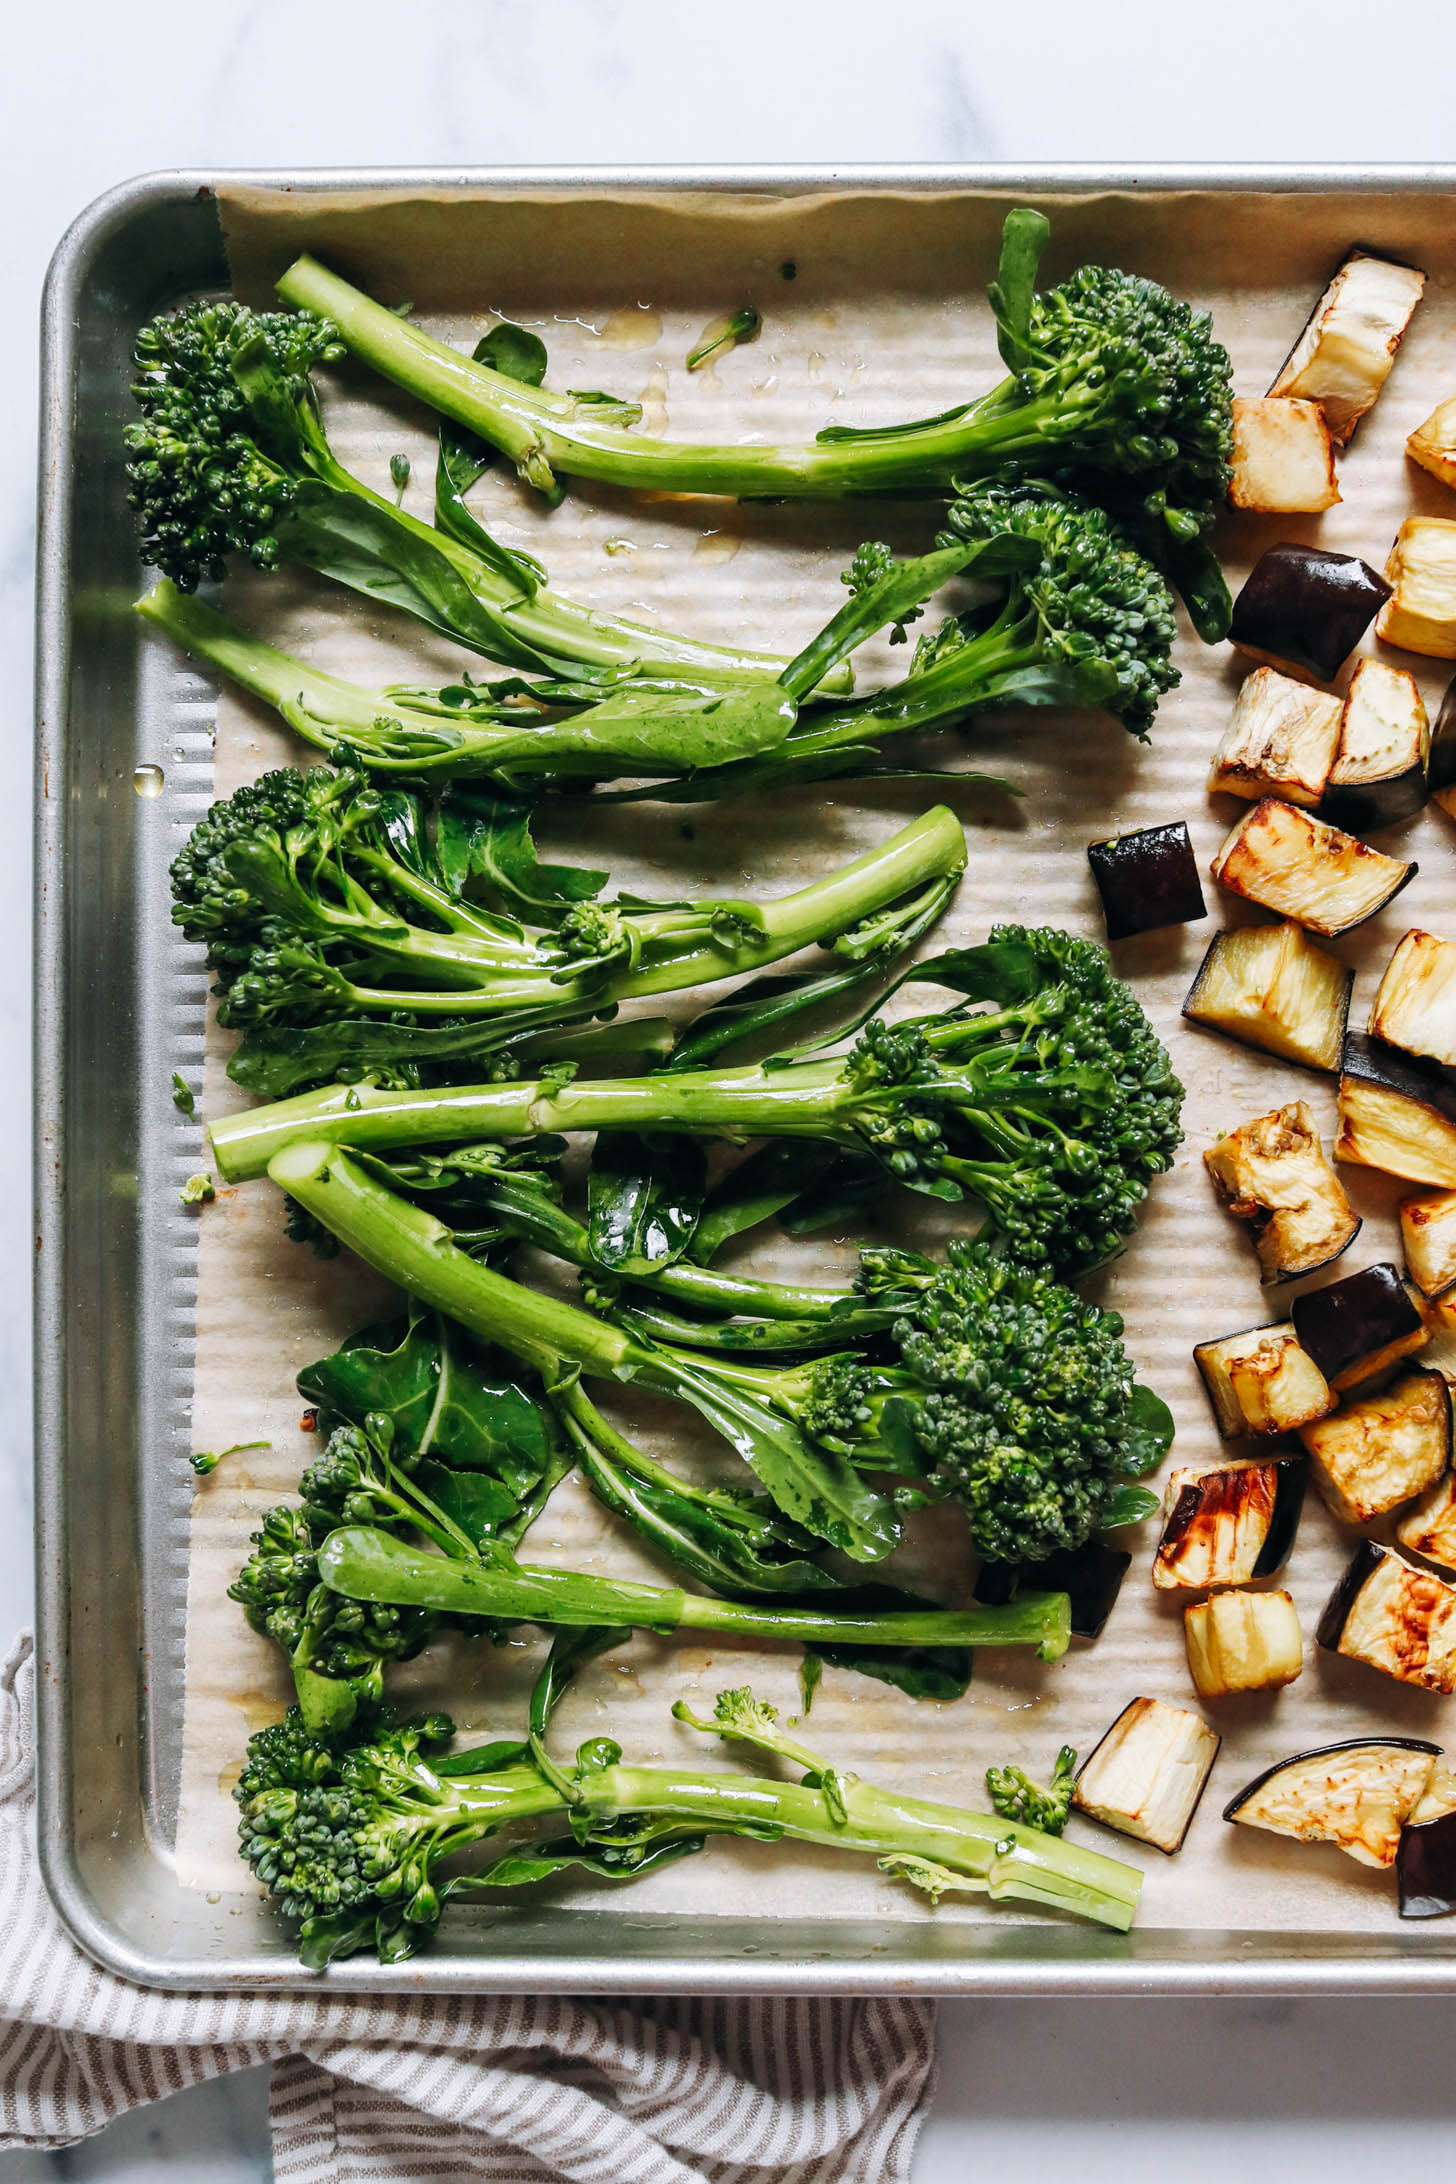 Sheet pan with broccolini and cubed roasted eggplant